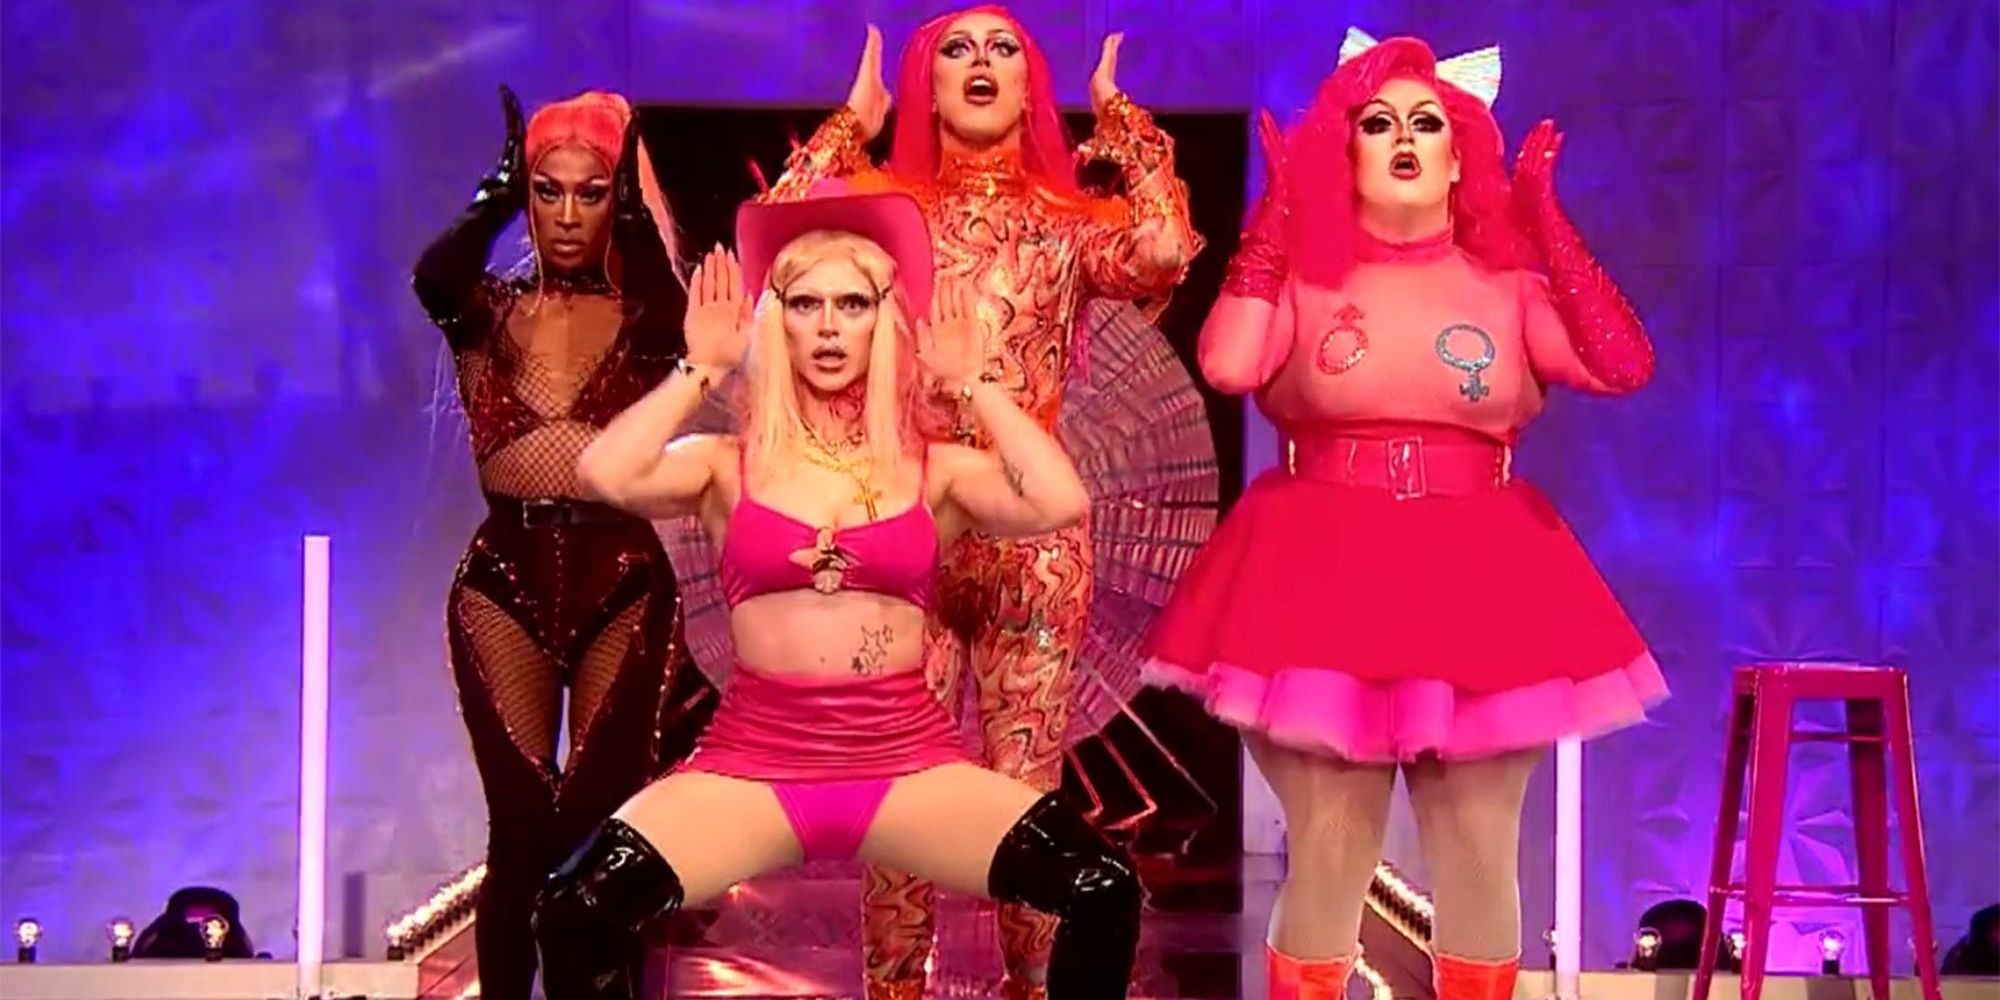 Bimini, Tayce, A'Whora &amp; Lawrence Cheney perform the song &quot;UK Hun?&quot; on RuPaul's Drag Race UK..